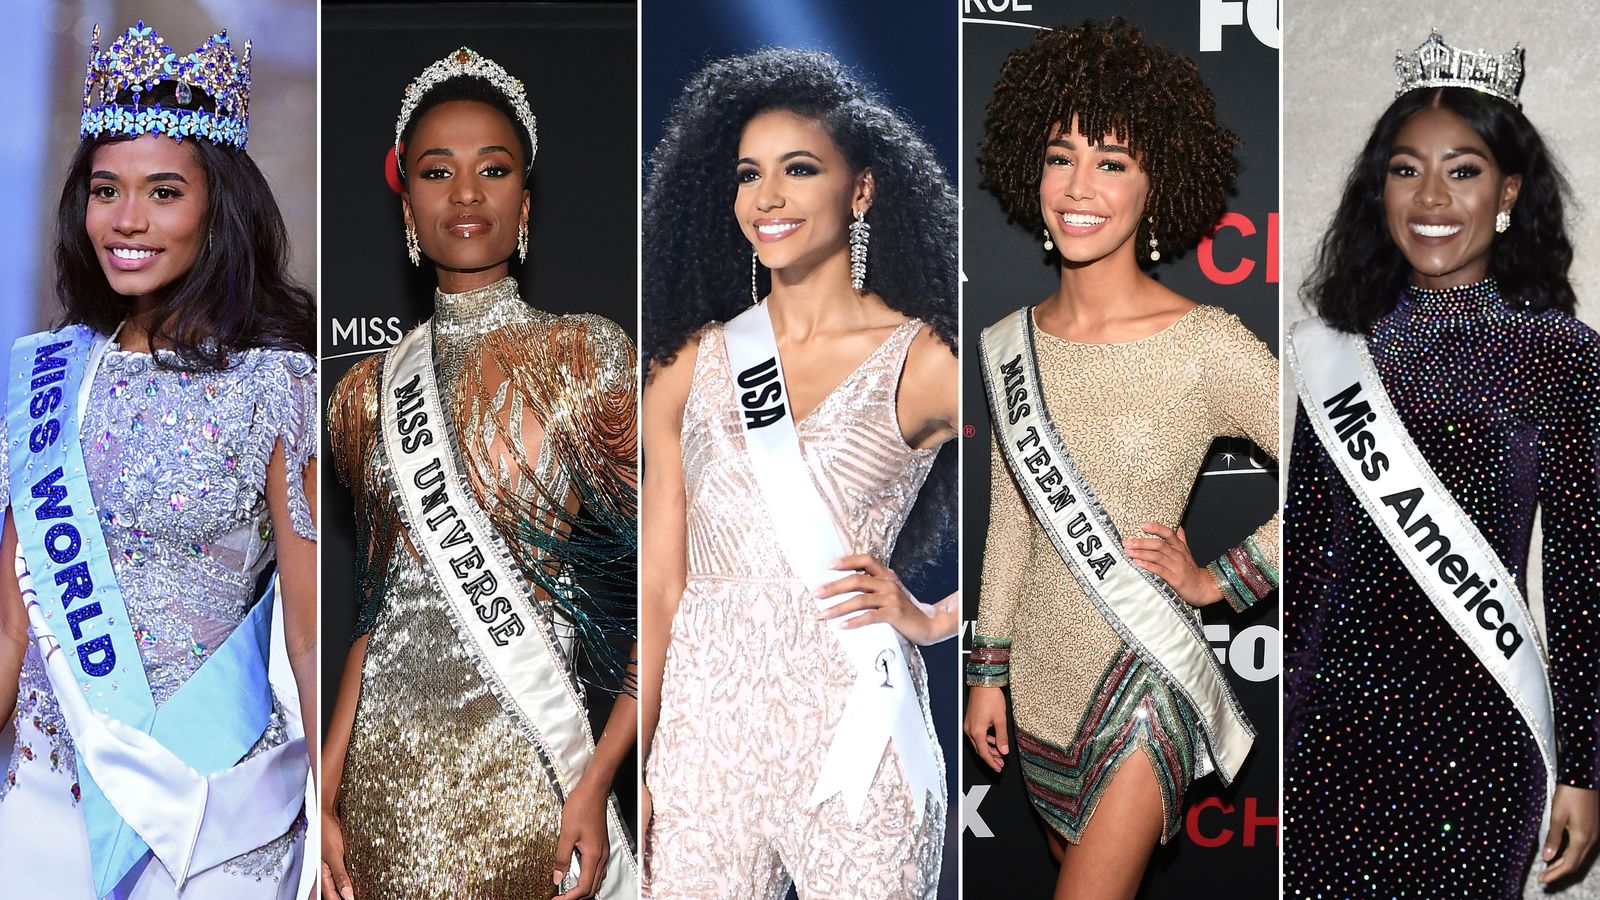 5 titleholders of major pageants are all women of color. And